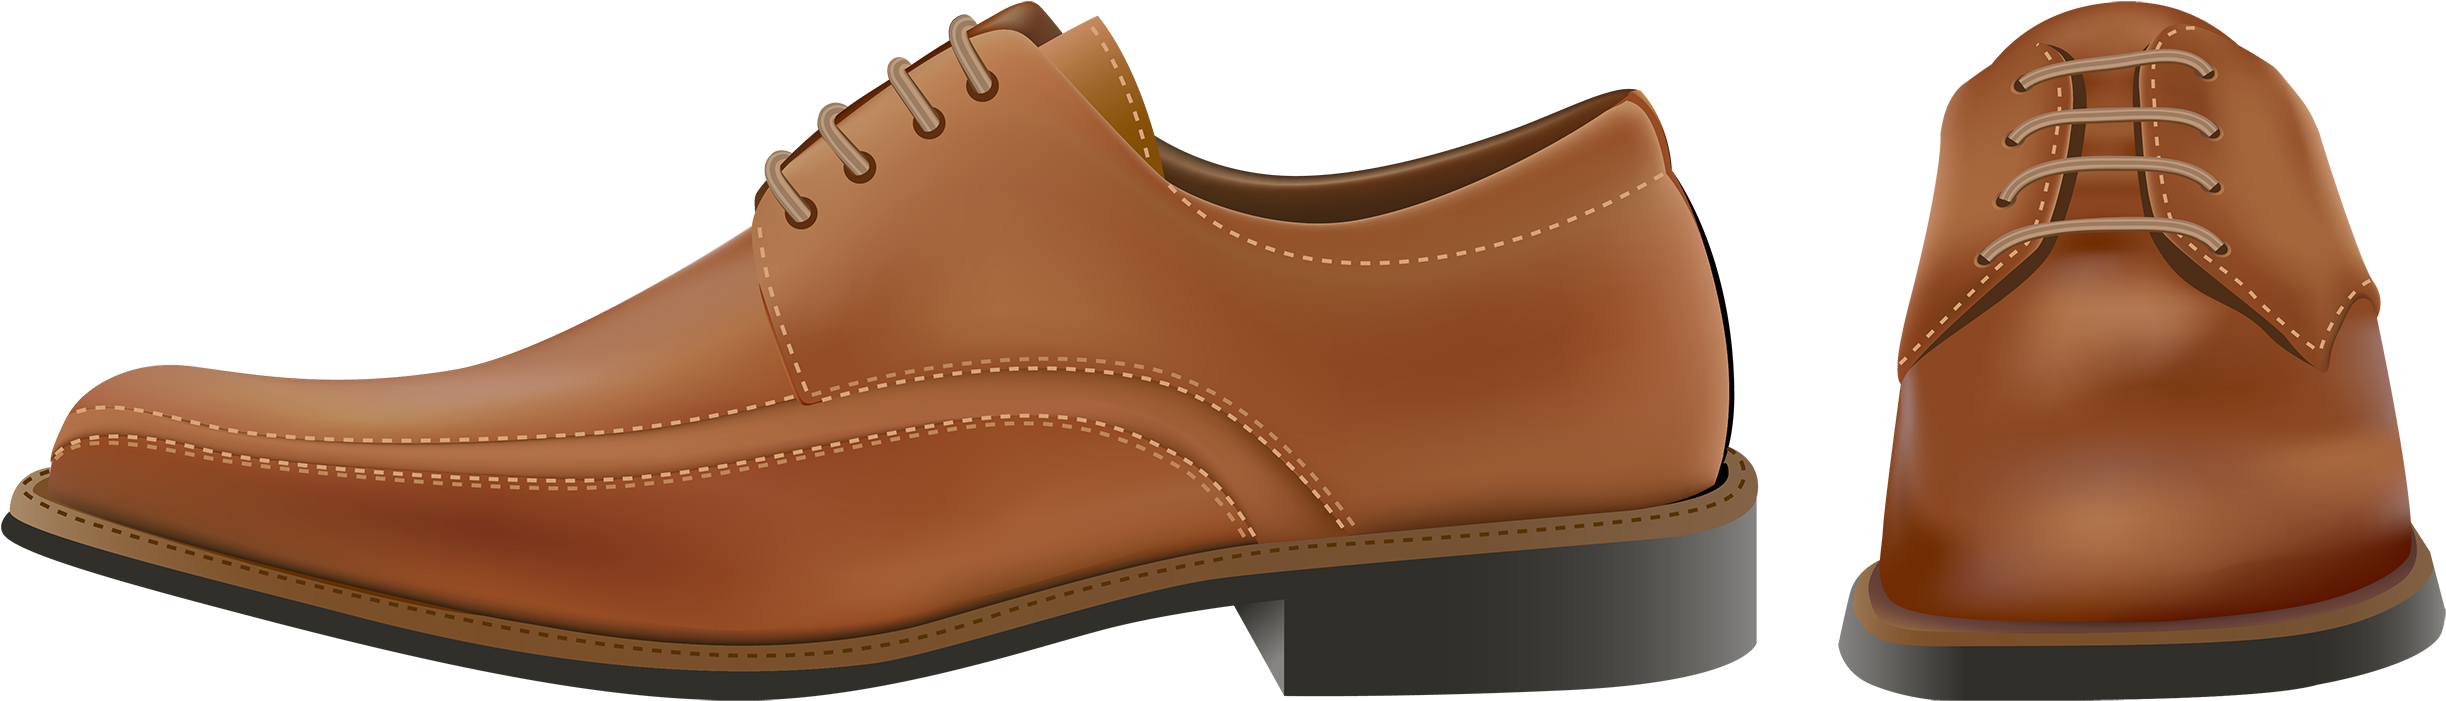 Brown Leather Dress Shoes Sideand Front View PNG